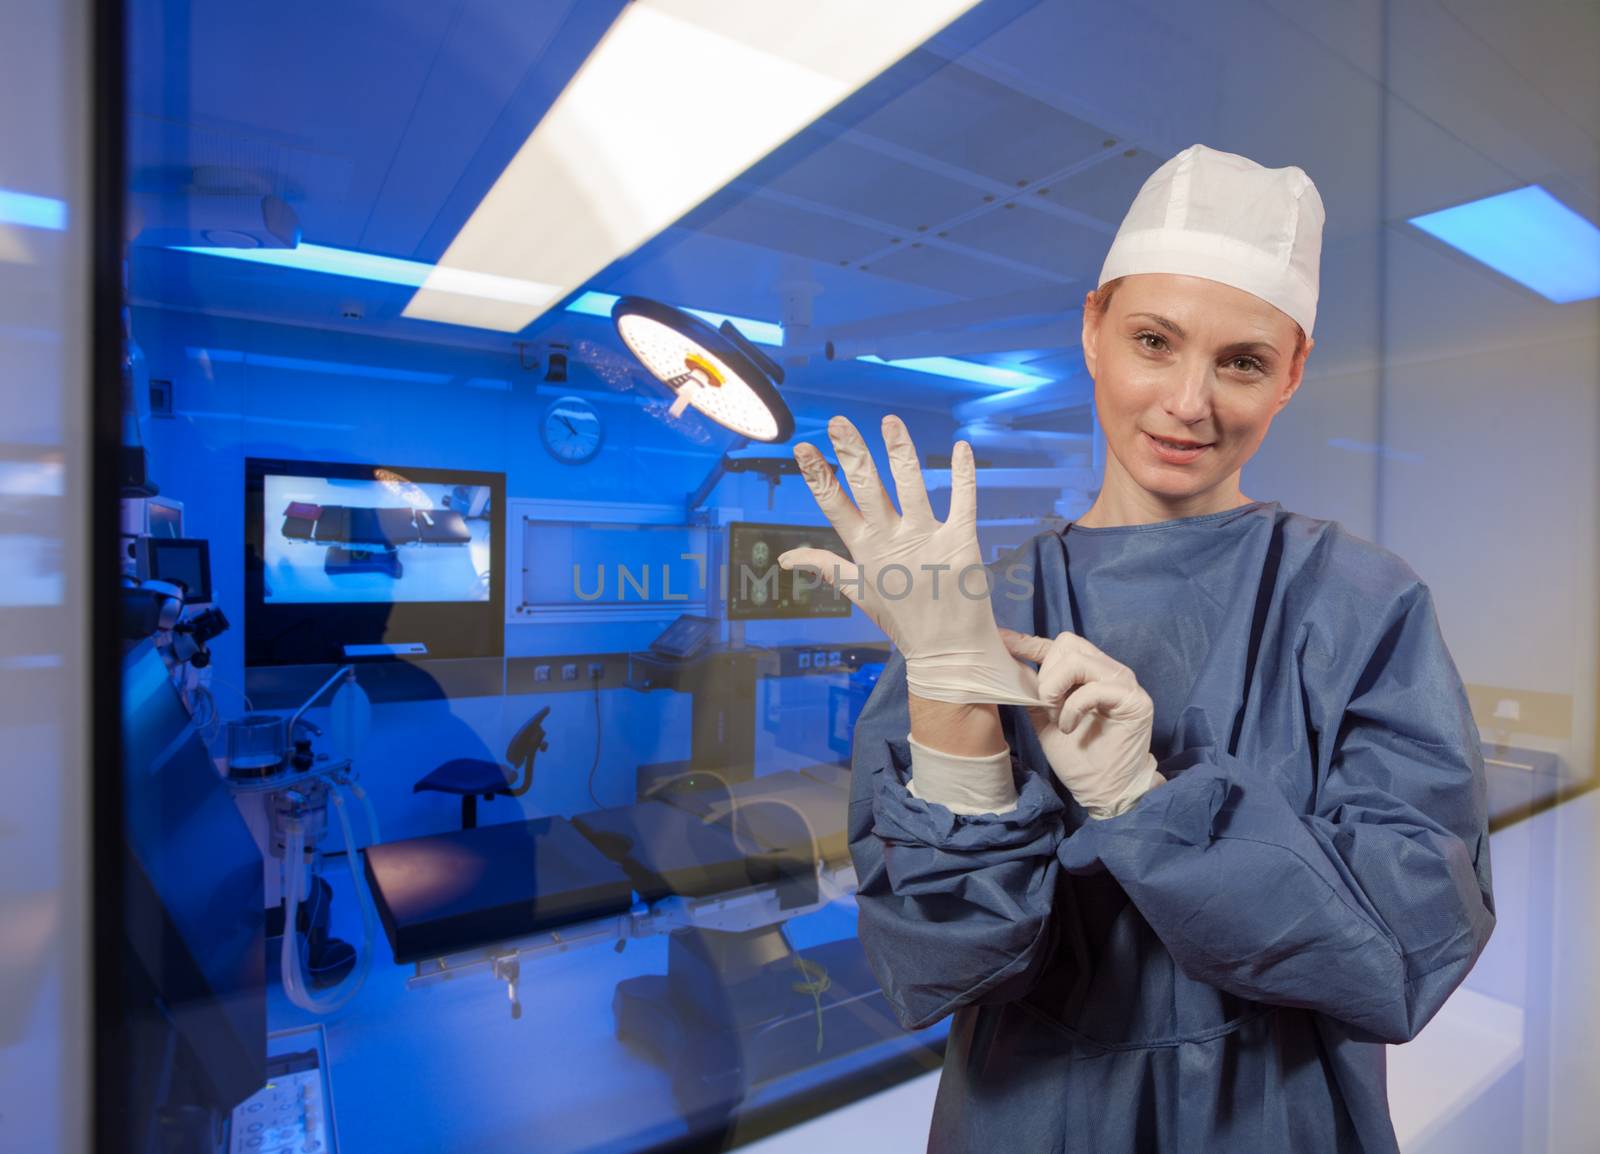 A medical personal putting protective surgeons glove in front of operating room.